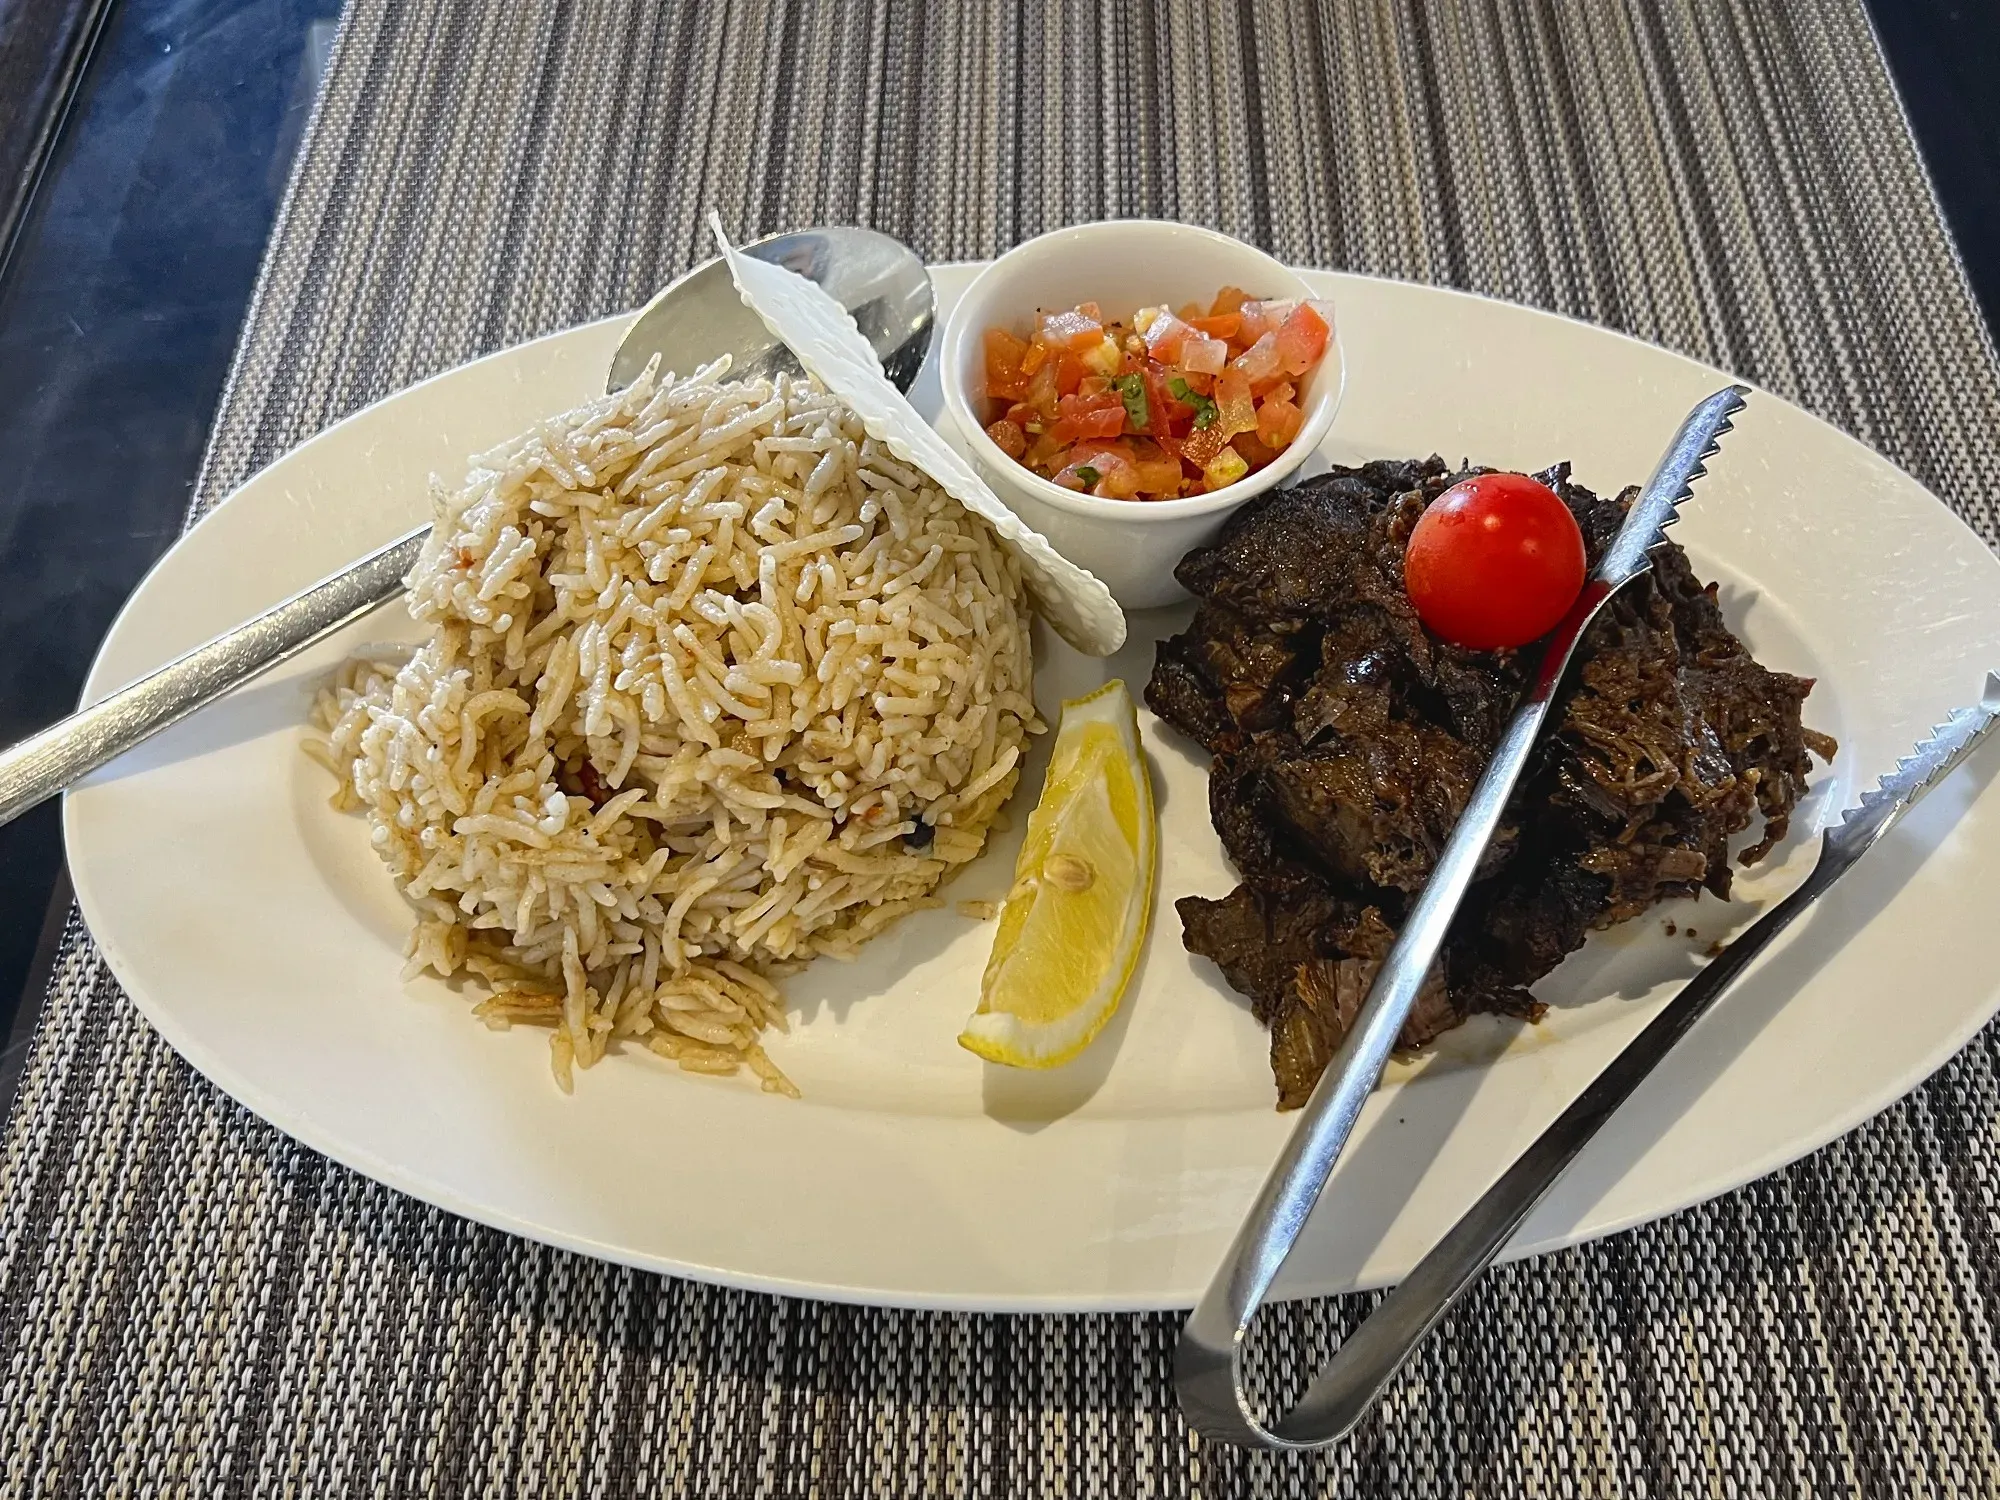 Plate of shuwa with side of rice, angled shot.